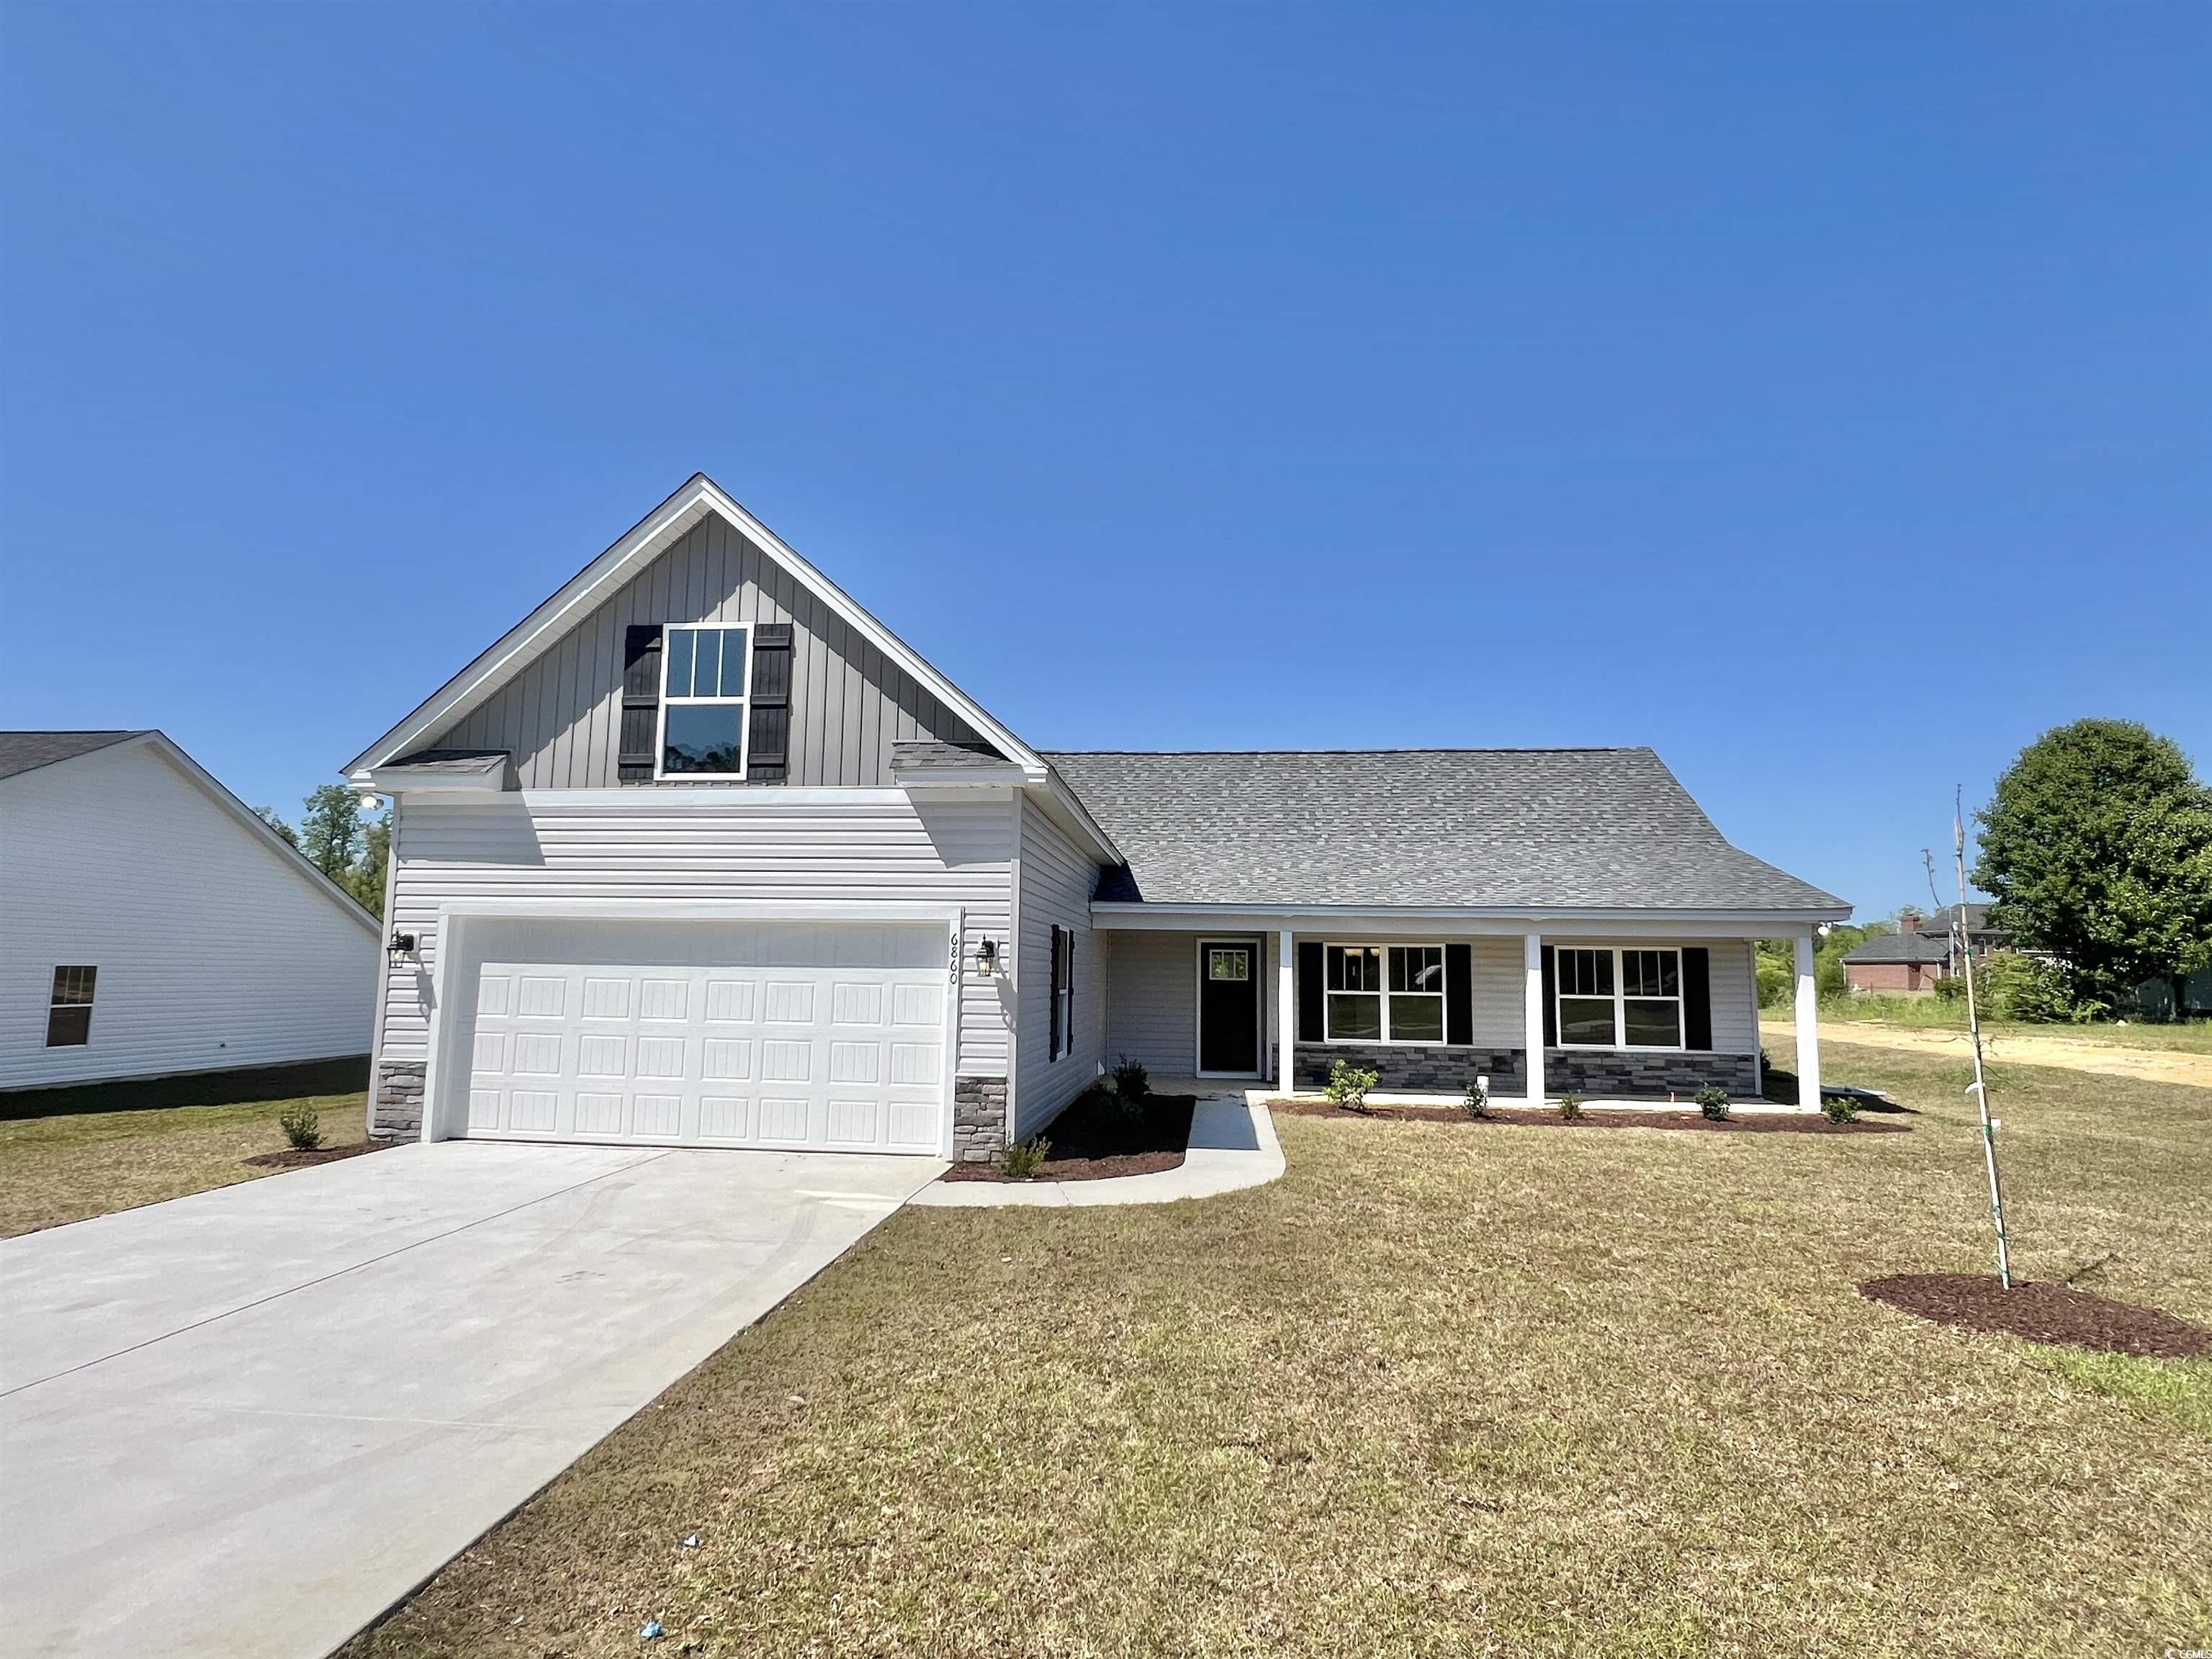 new construction, 4br/3bath home on 1/2 acre lot!! have you been looking for a new, no hoa home on a large lot close to the beach, but away from the hustle and bustle??? if so, this beauty is the one!!! bring your rv, boat, utility trailer, and install your pool and detached building. this yard can accommodate it all!!! this well-appointed home features huge front & rear porches, upgraded wood-look laminate flooring in the great room, dining area, and entry/hallway, granite countertops in the kitchen, tile flooring in the bathrooms, laundry and kitchen, double vanity and 5' custom tile walk-in shower in the master bath, vaulted ceilings & ceiling fans in living room and all the bedrooms, and an irrigation system to keep your yard green during the summer months. this home has a very peaceful setting in conway yet offers a short drive to all the grand strand has to offer. as the new owner of this gorgeous home you'll never be far away from golfing, fishing, dining, shopping... sand, sun and fun!!! **primary photo and backyard are of actual home. others are of another similar home. updated photos coming soon**